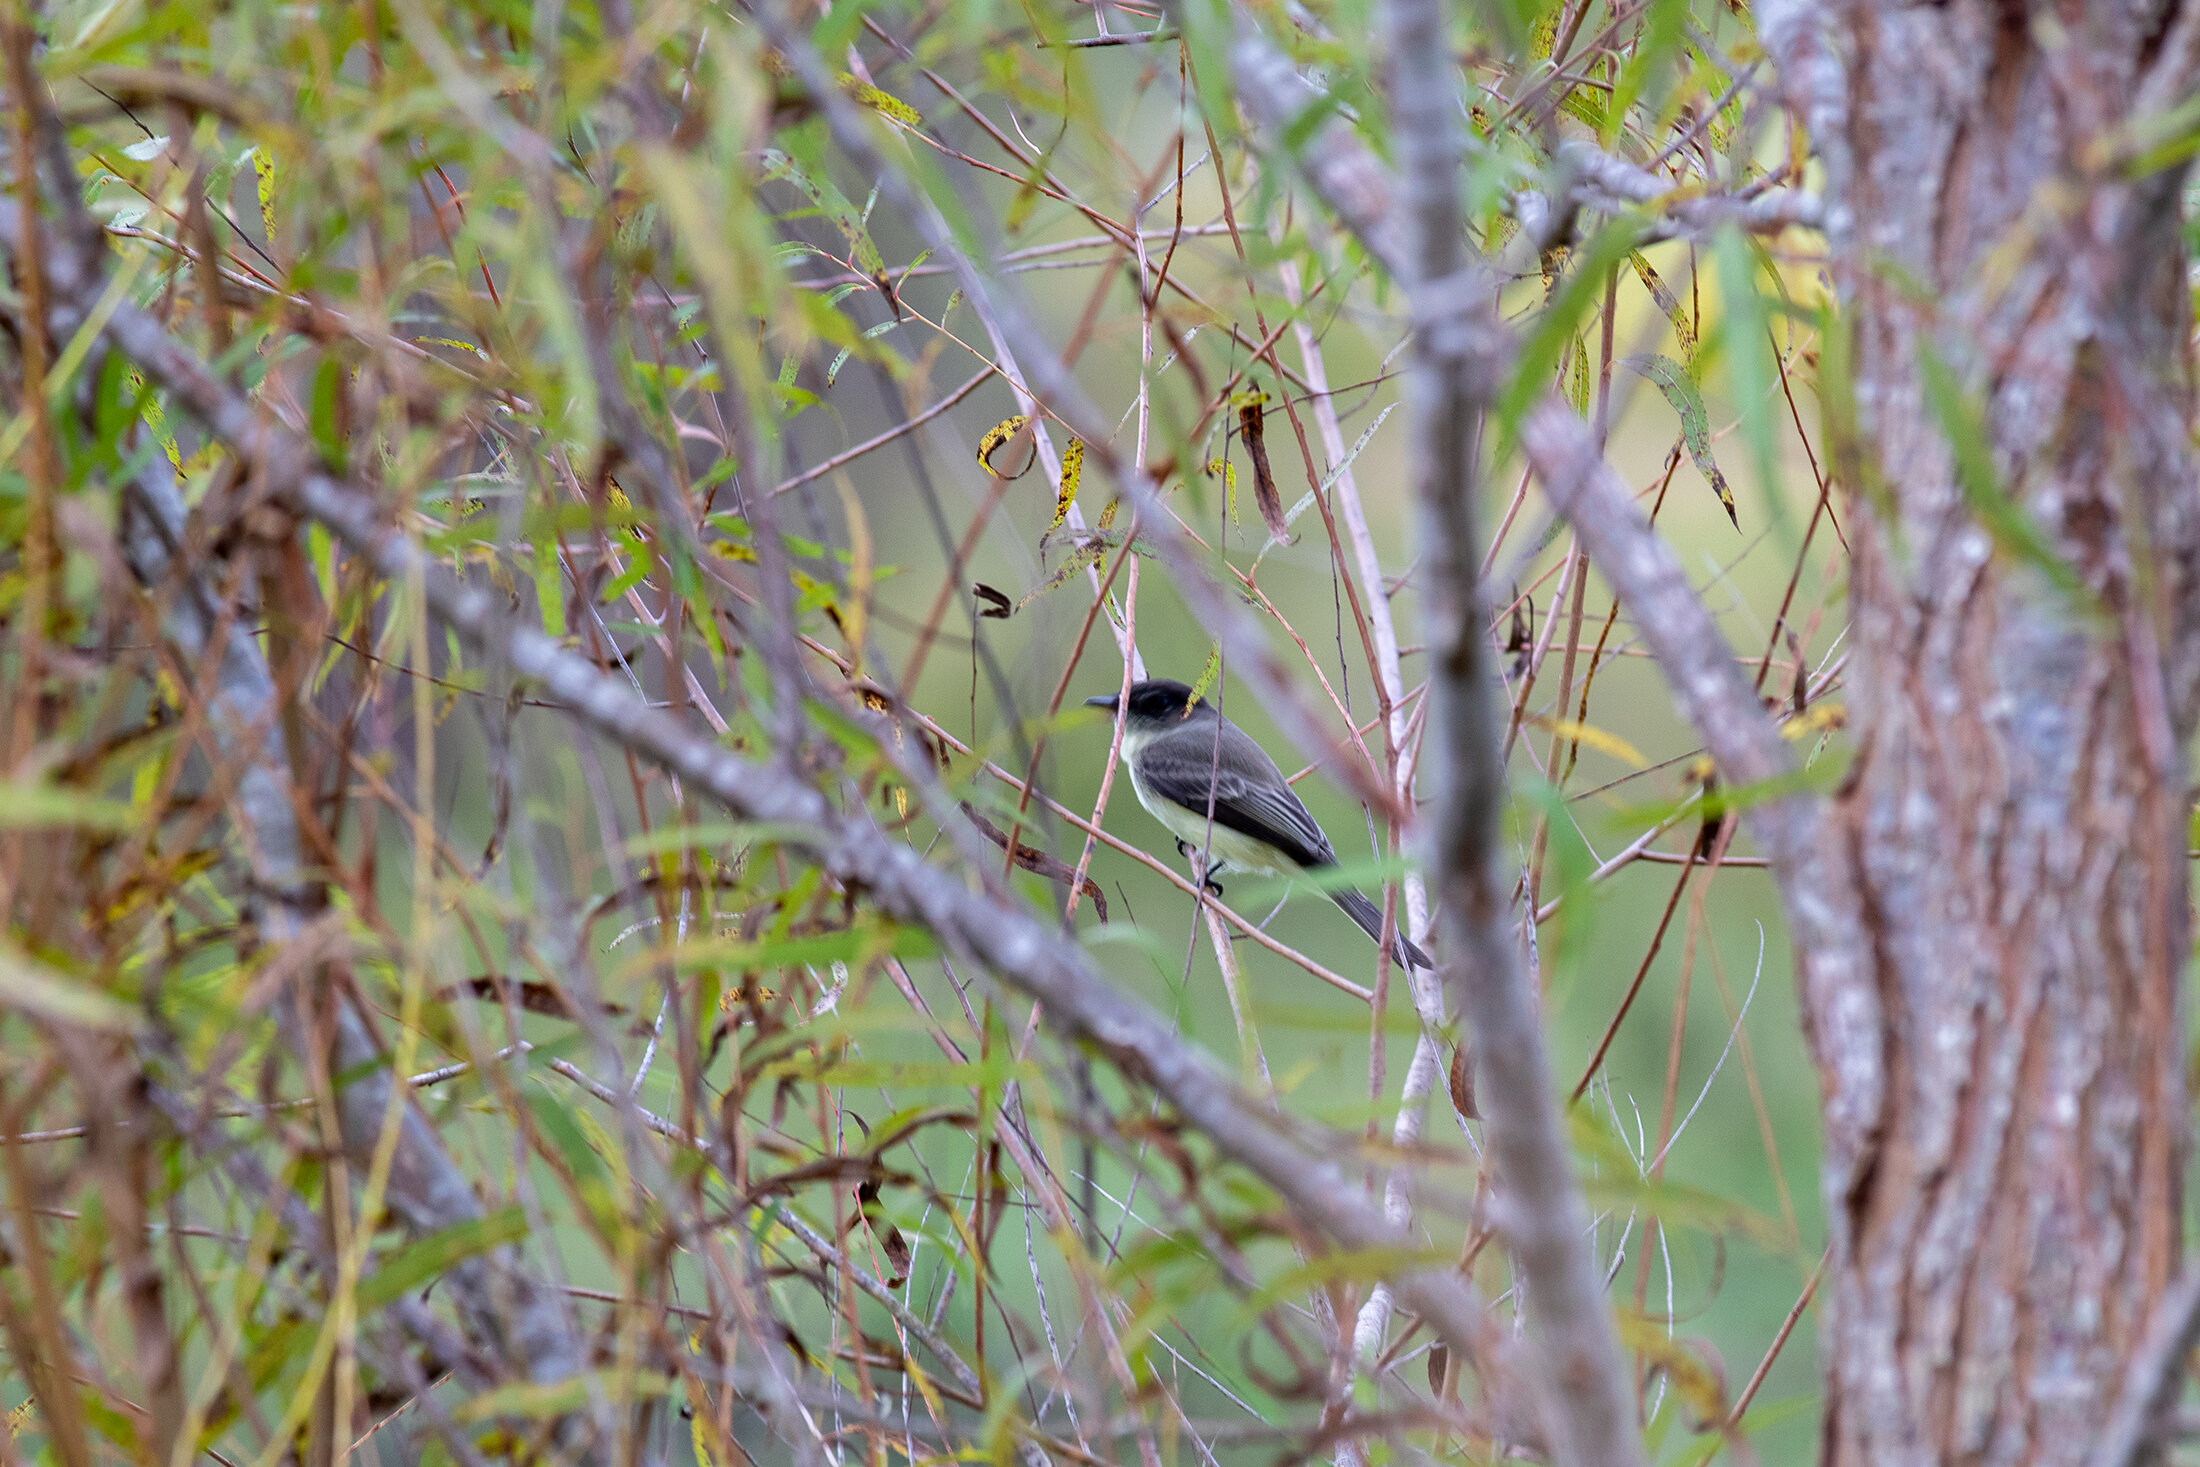 An Eastern Phoebe bird sighting is fairly common throughout the Trinity River Audubon grounds.